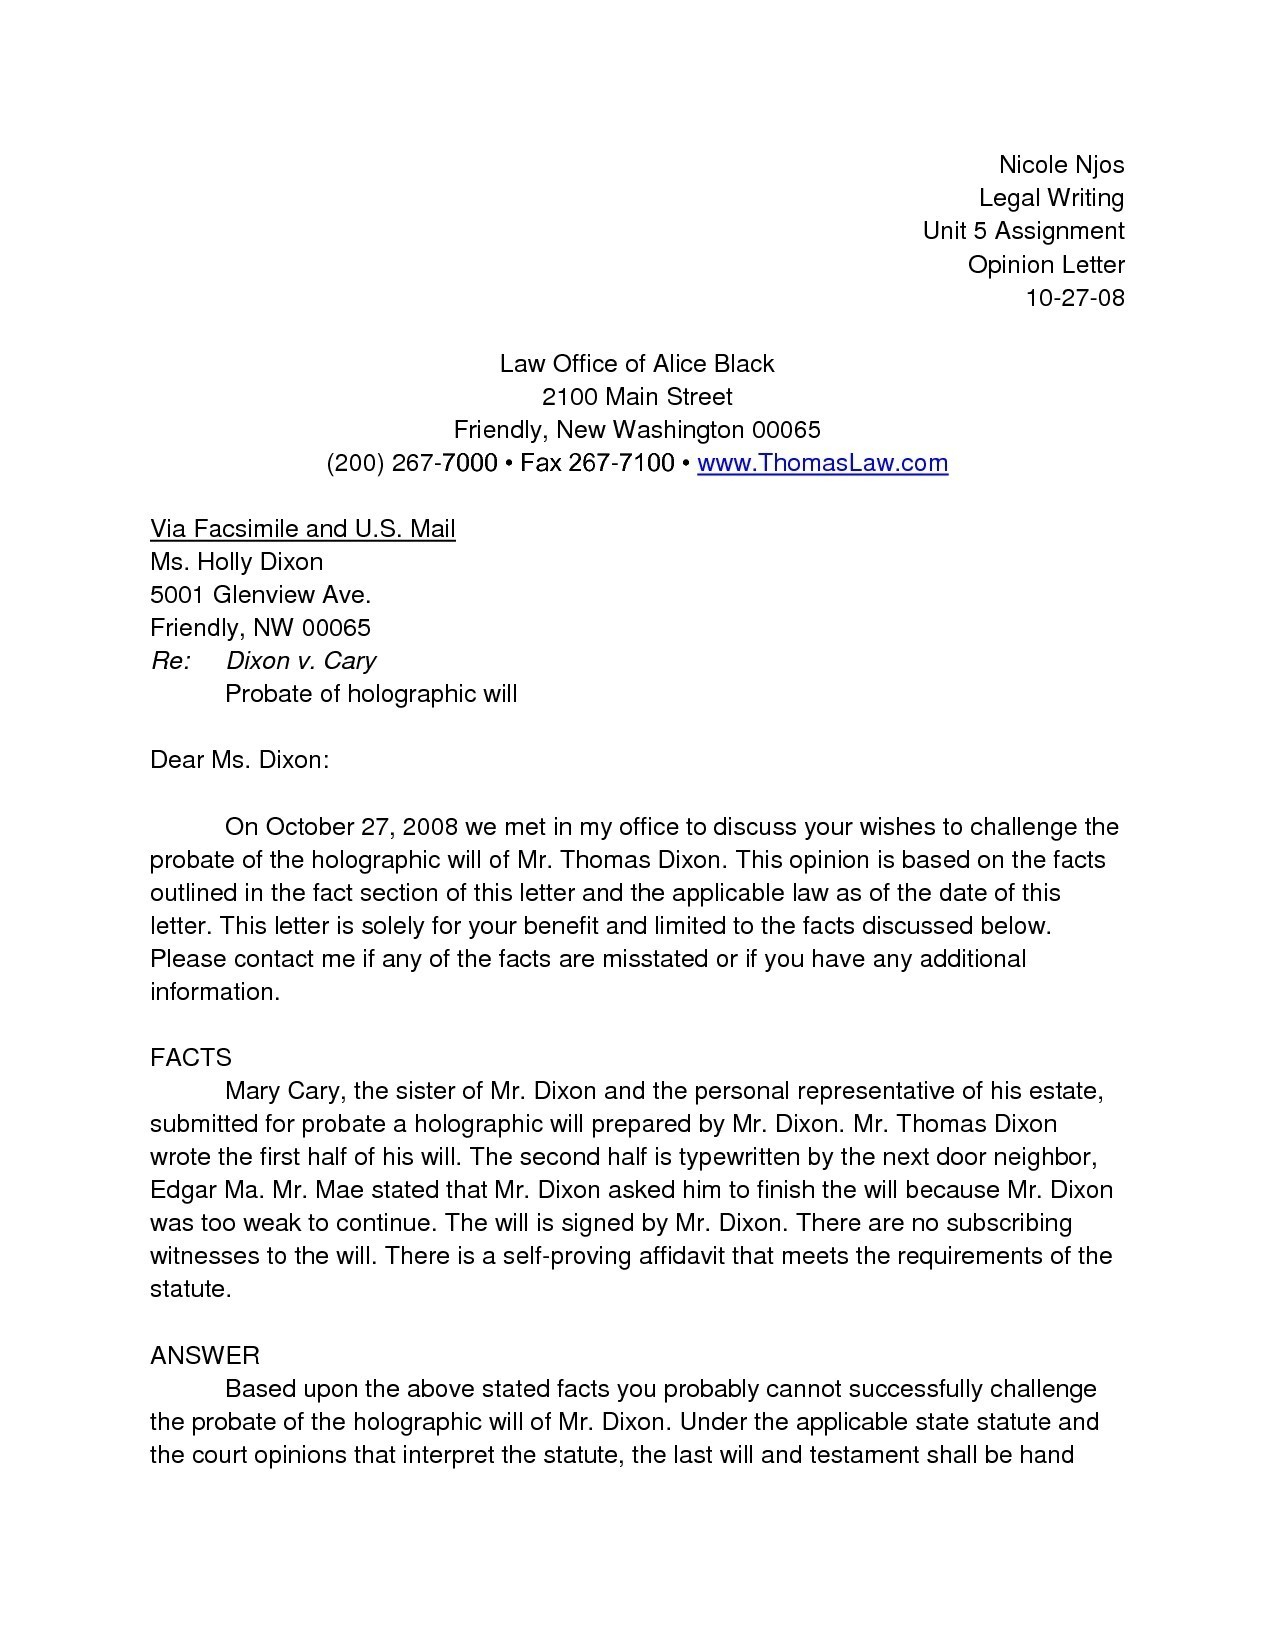 Probate Letter Template - format A Legal Letter New Samples Legal Opinion Letter New format